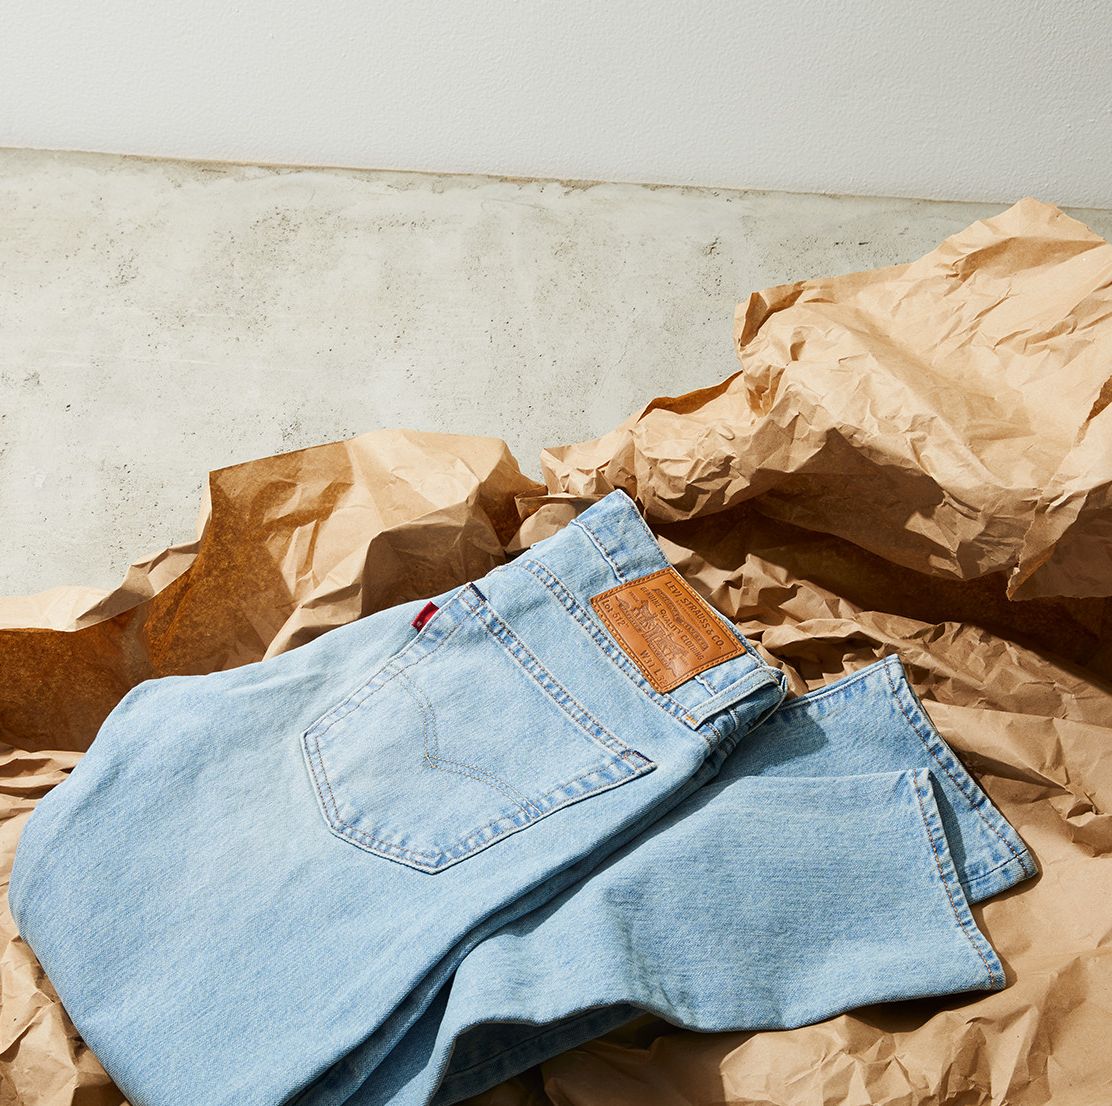 How Old Are Levi's Jeans?, Smart News